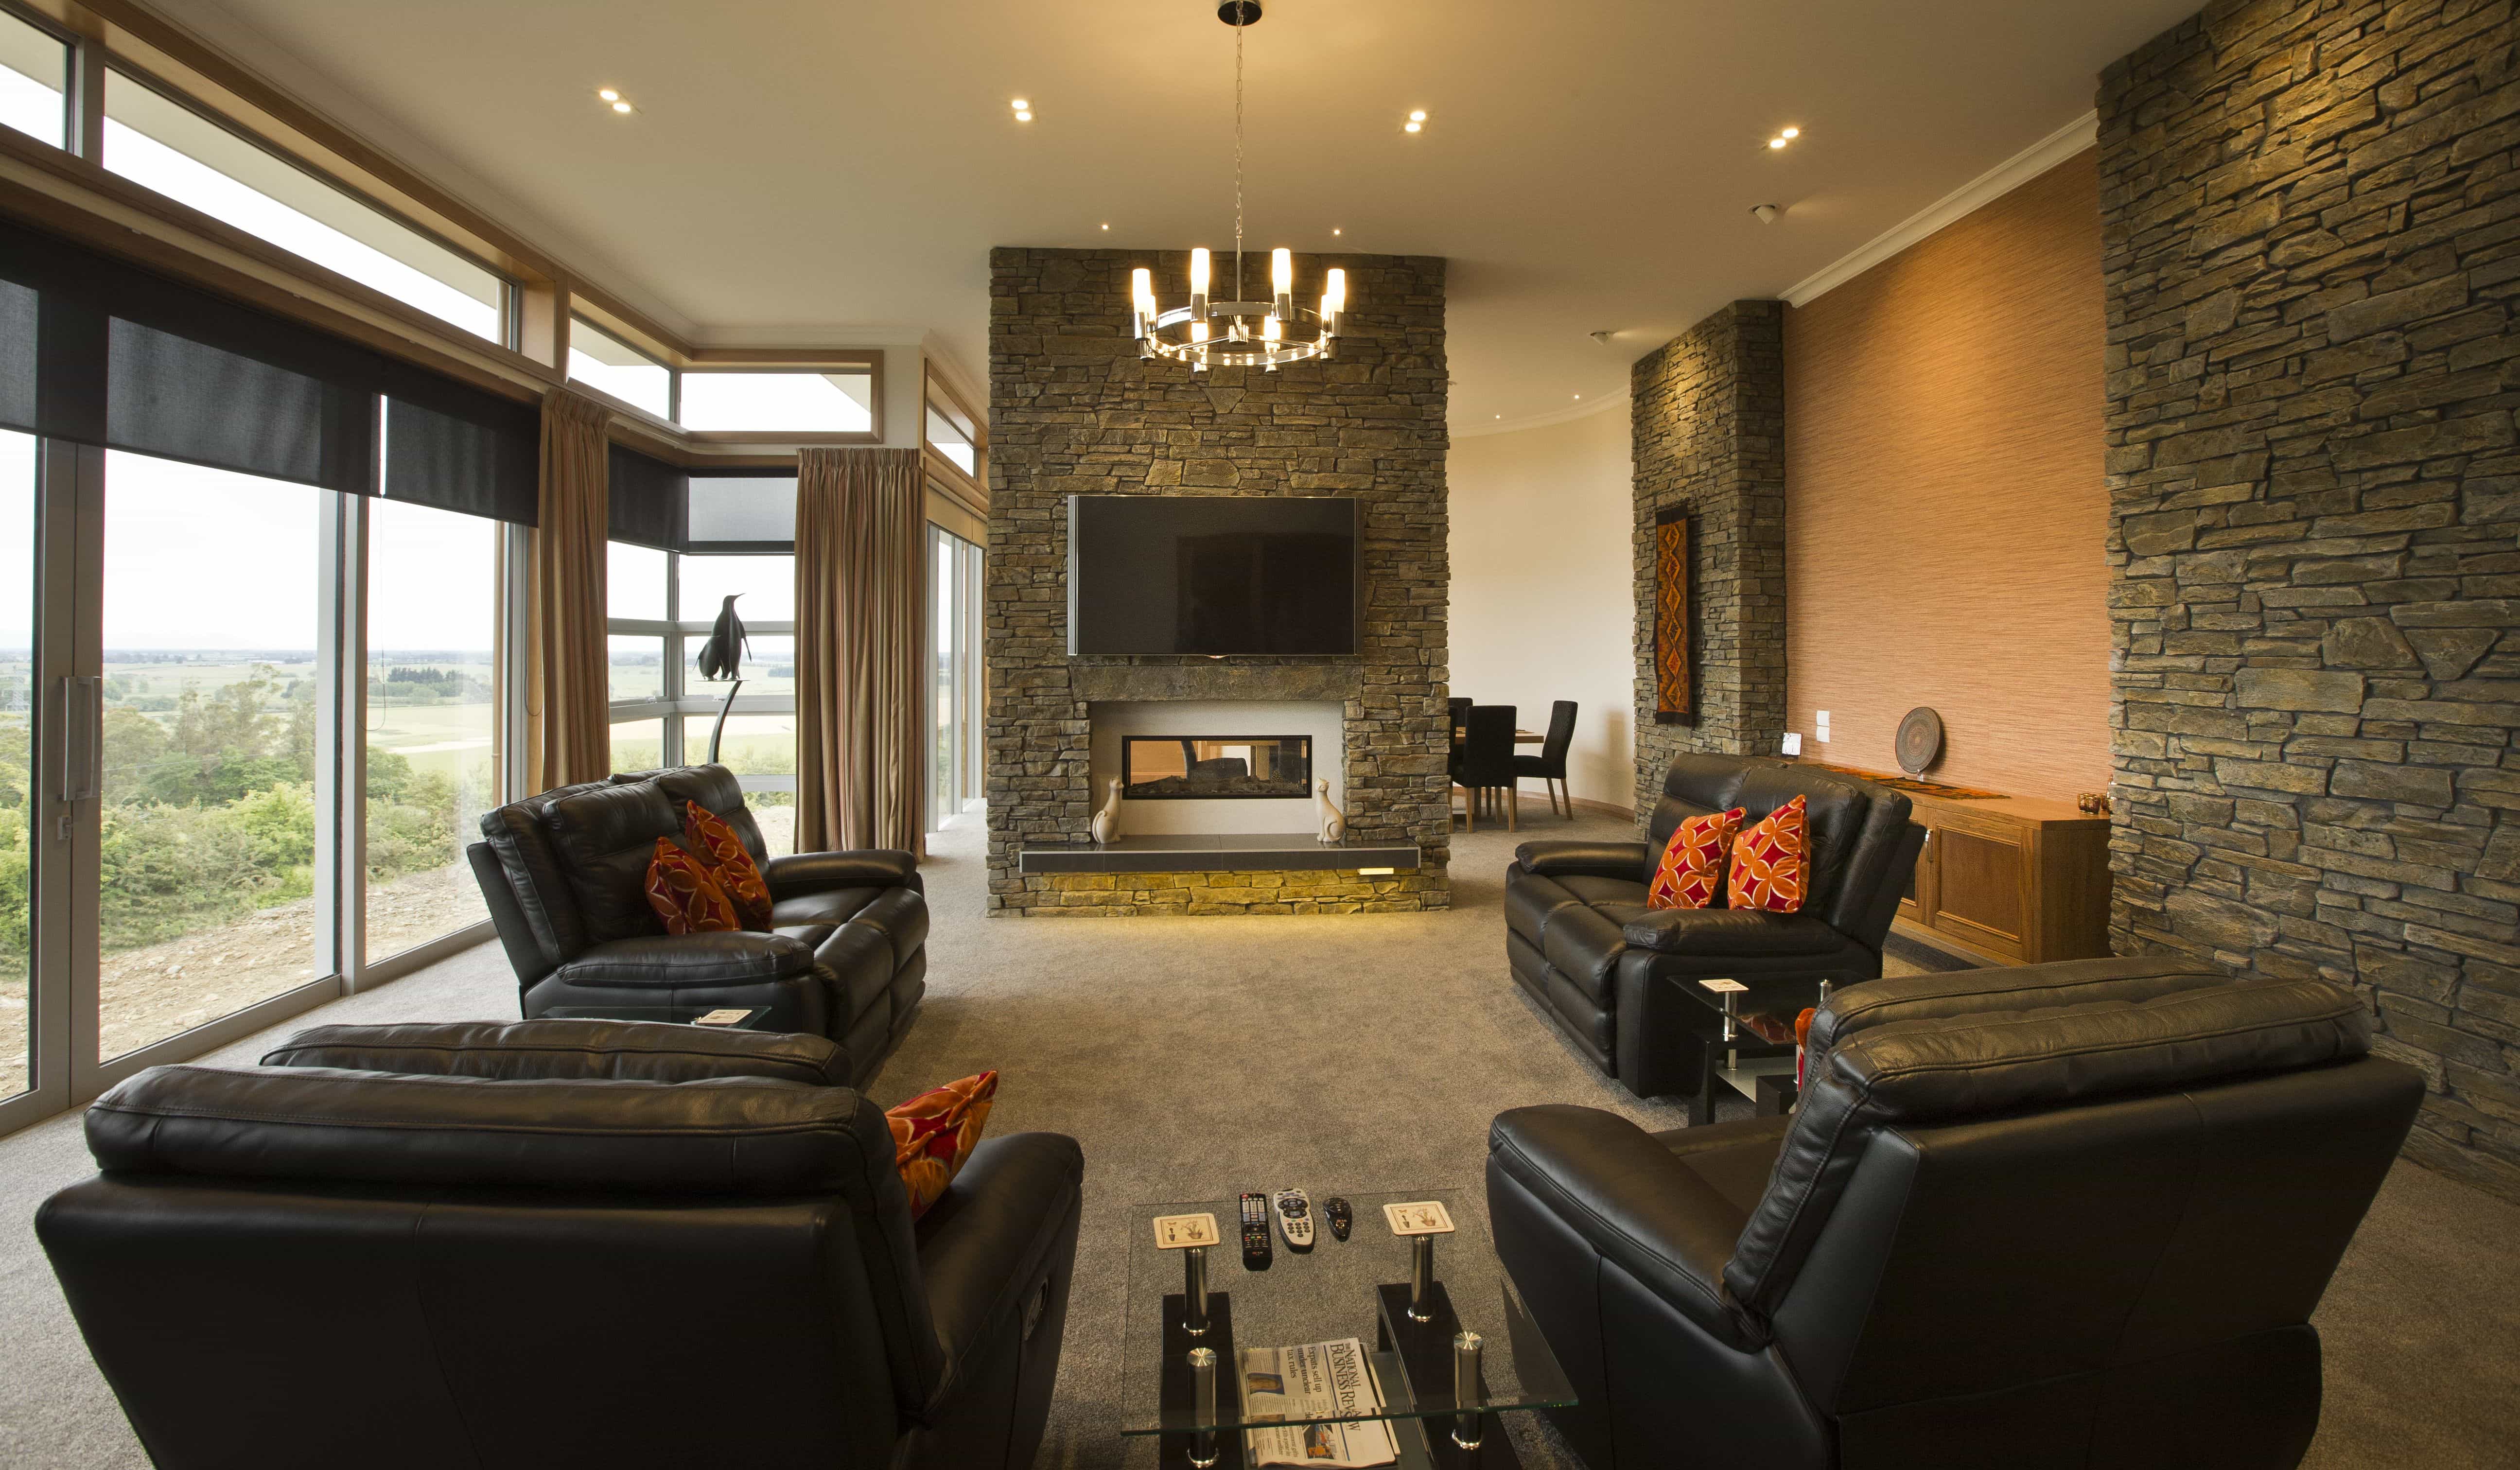  Formal lounge with stone work to mirror the outside of the house